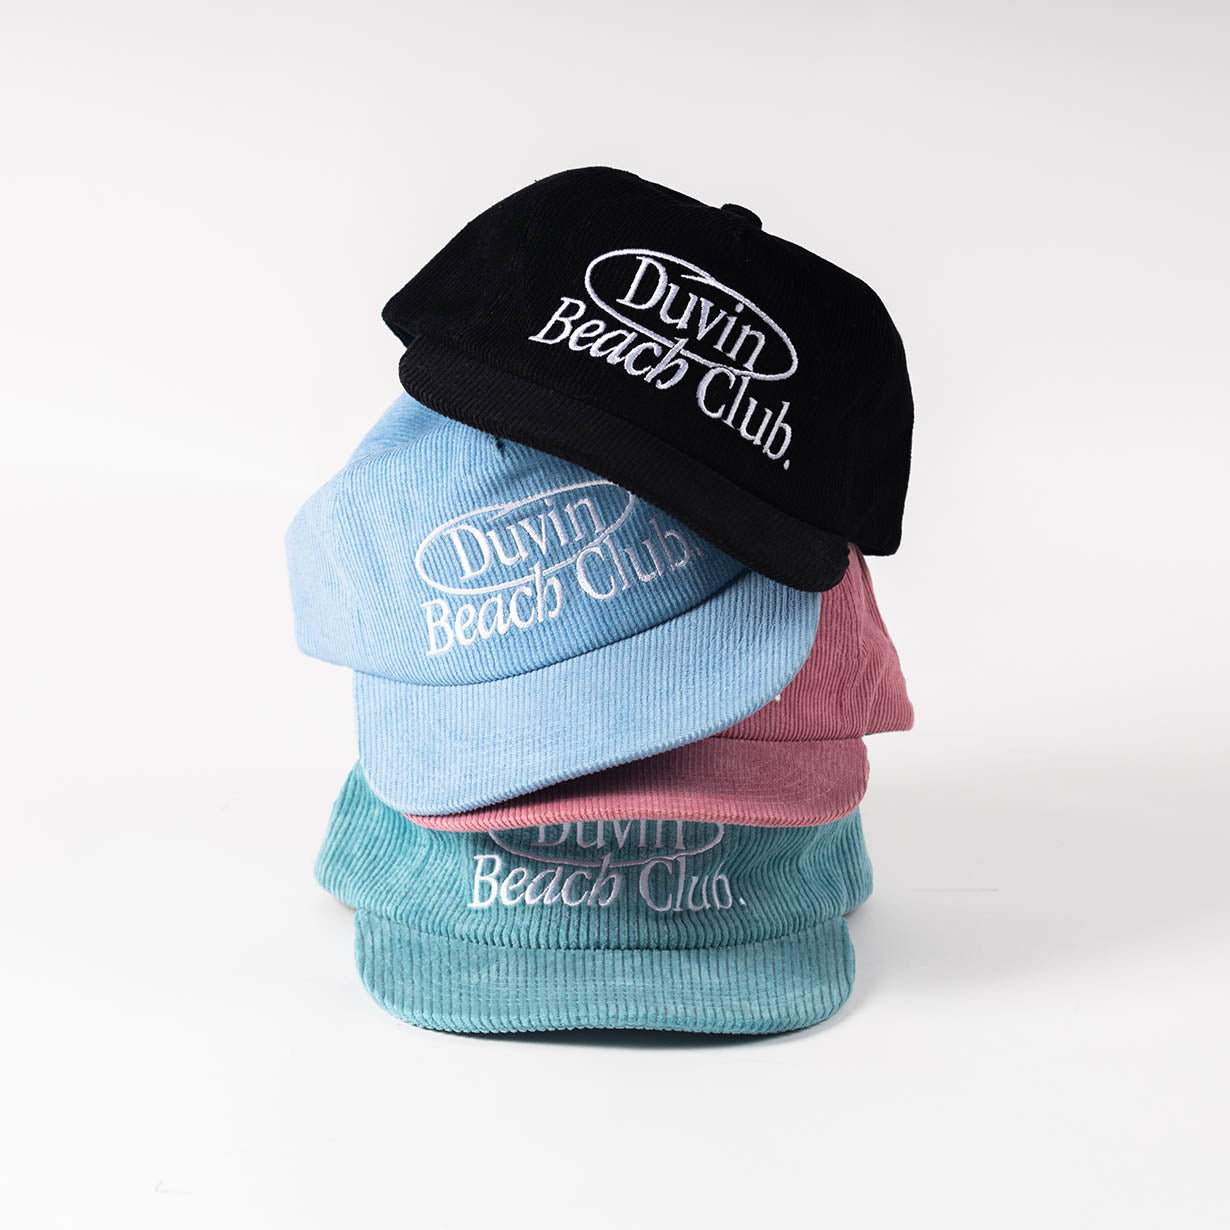 Members Only Corduroy Hat - Pink